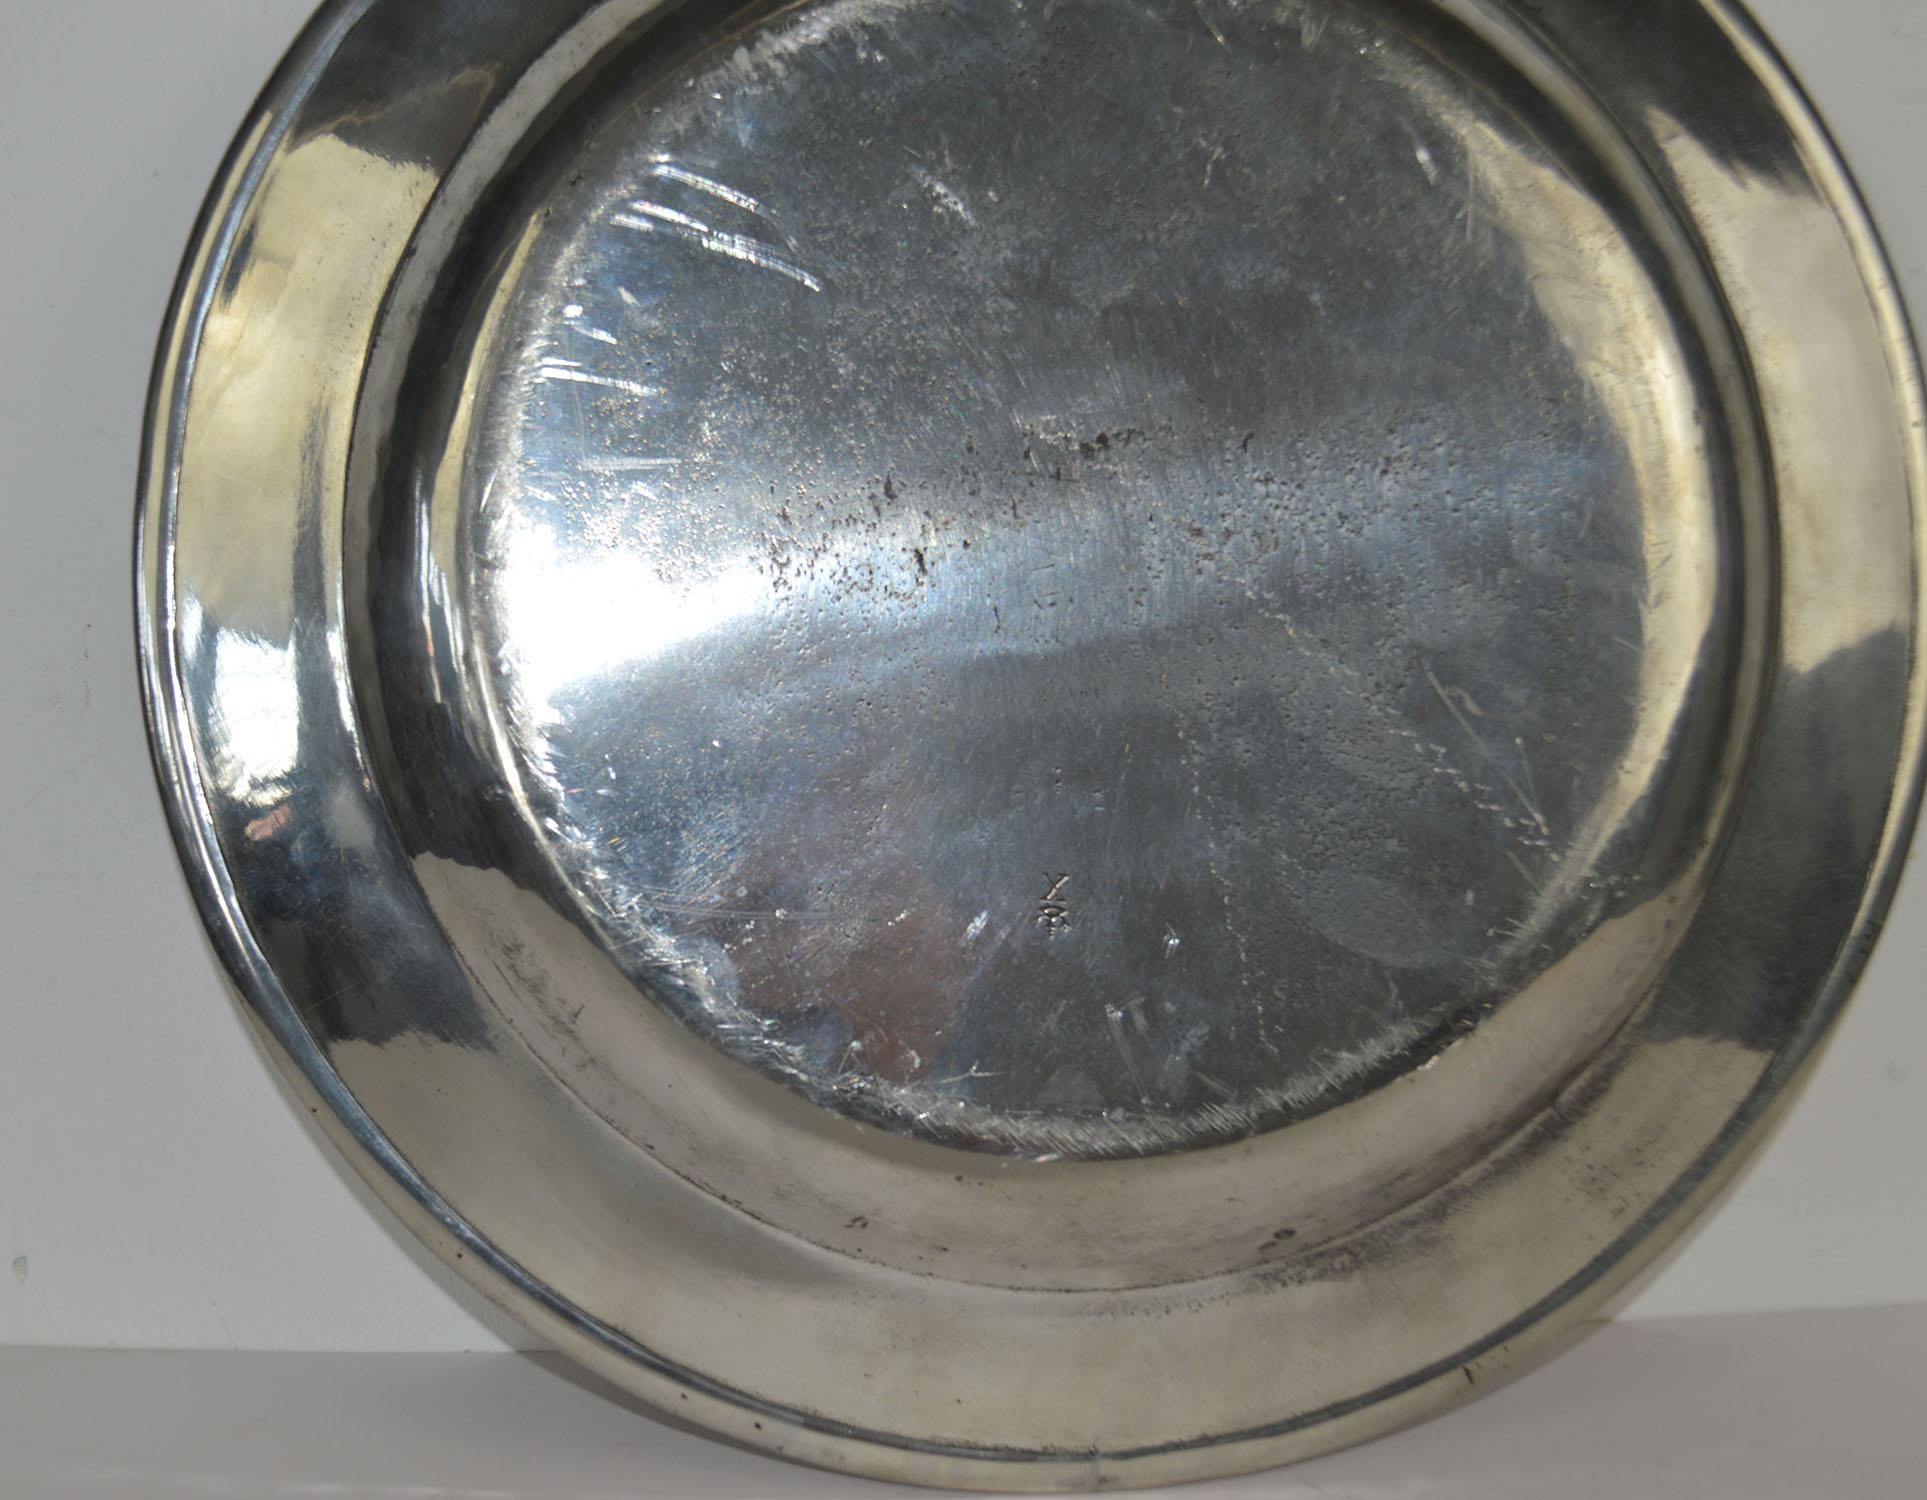  2 Antique Brightly Polished 15 inch Pewter Chargers, English, 18th Century 1